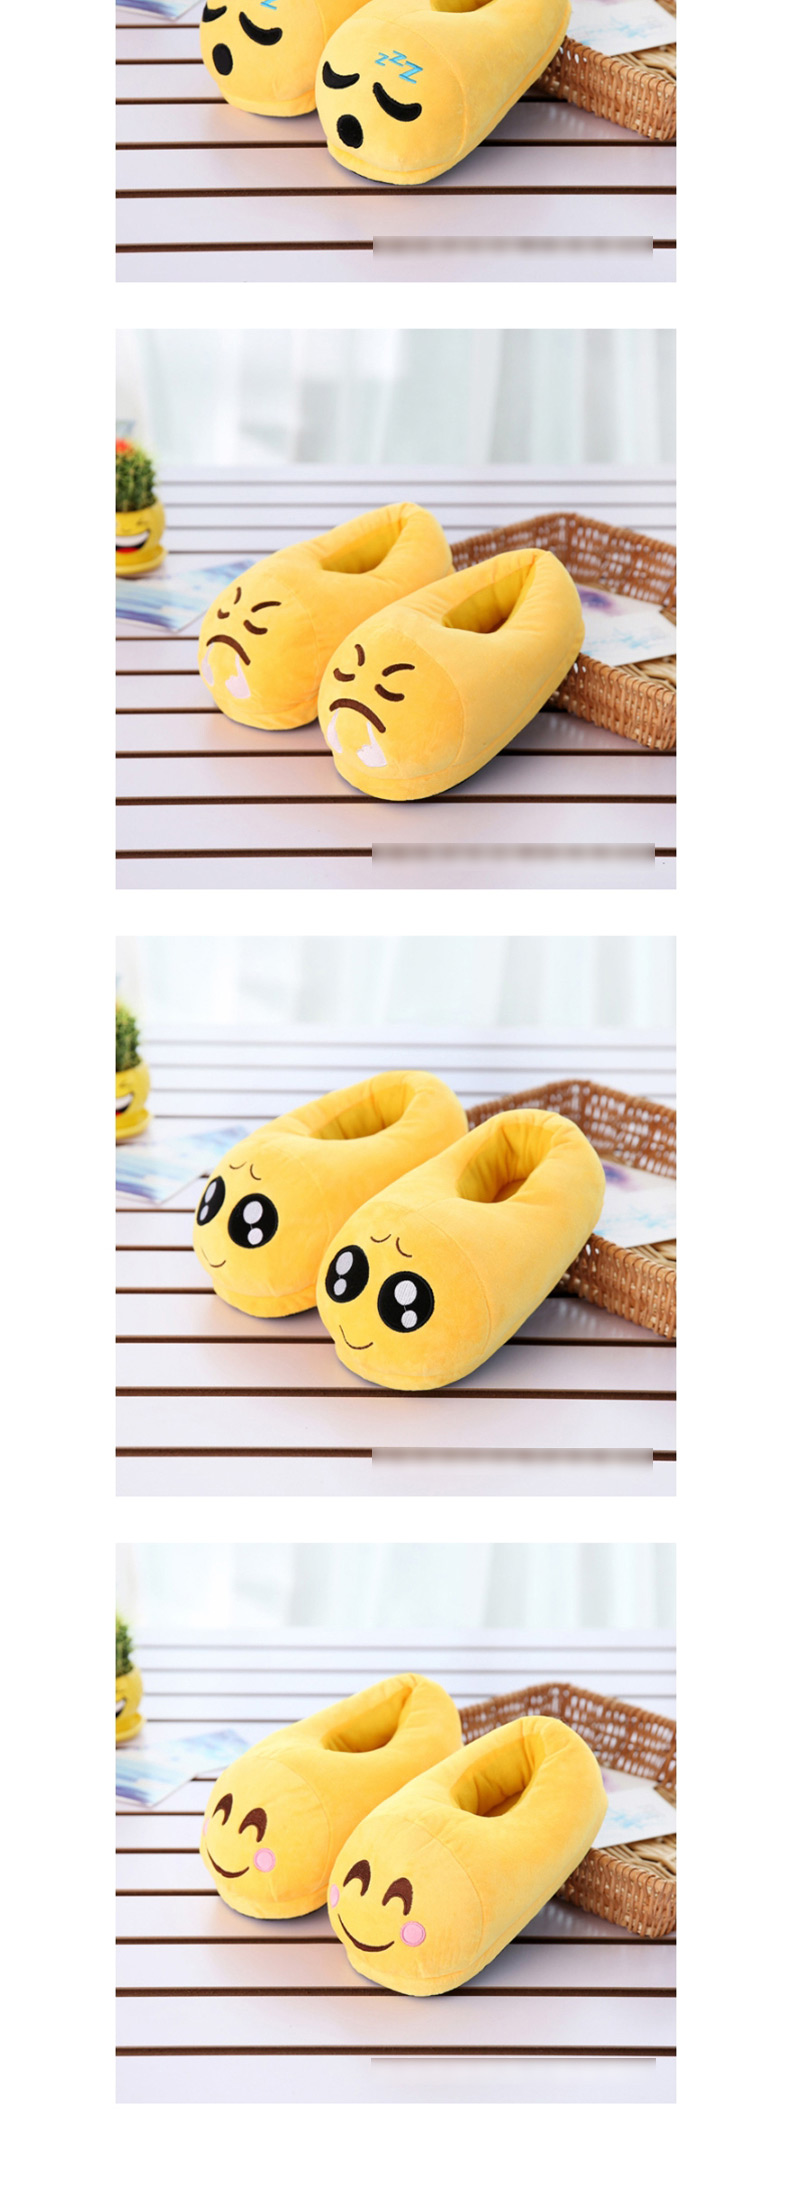 Fashion 6 Yellow Smiley Face Cartoon Expression Plush Bag With Cotton Slippers,Slippers